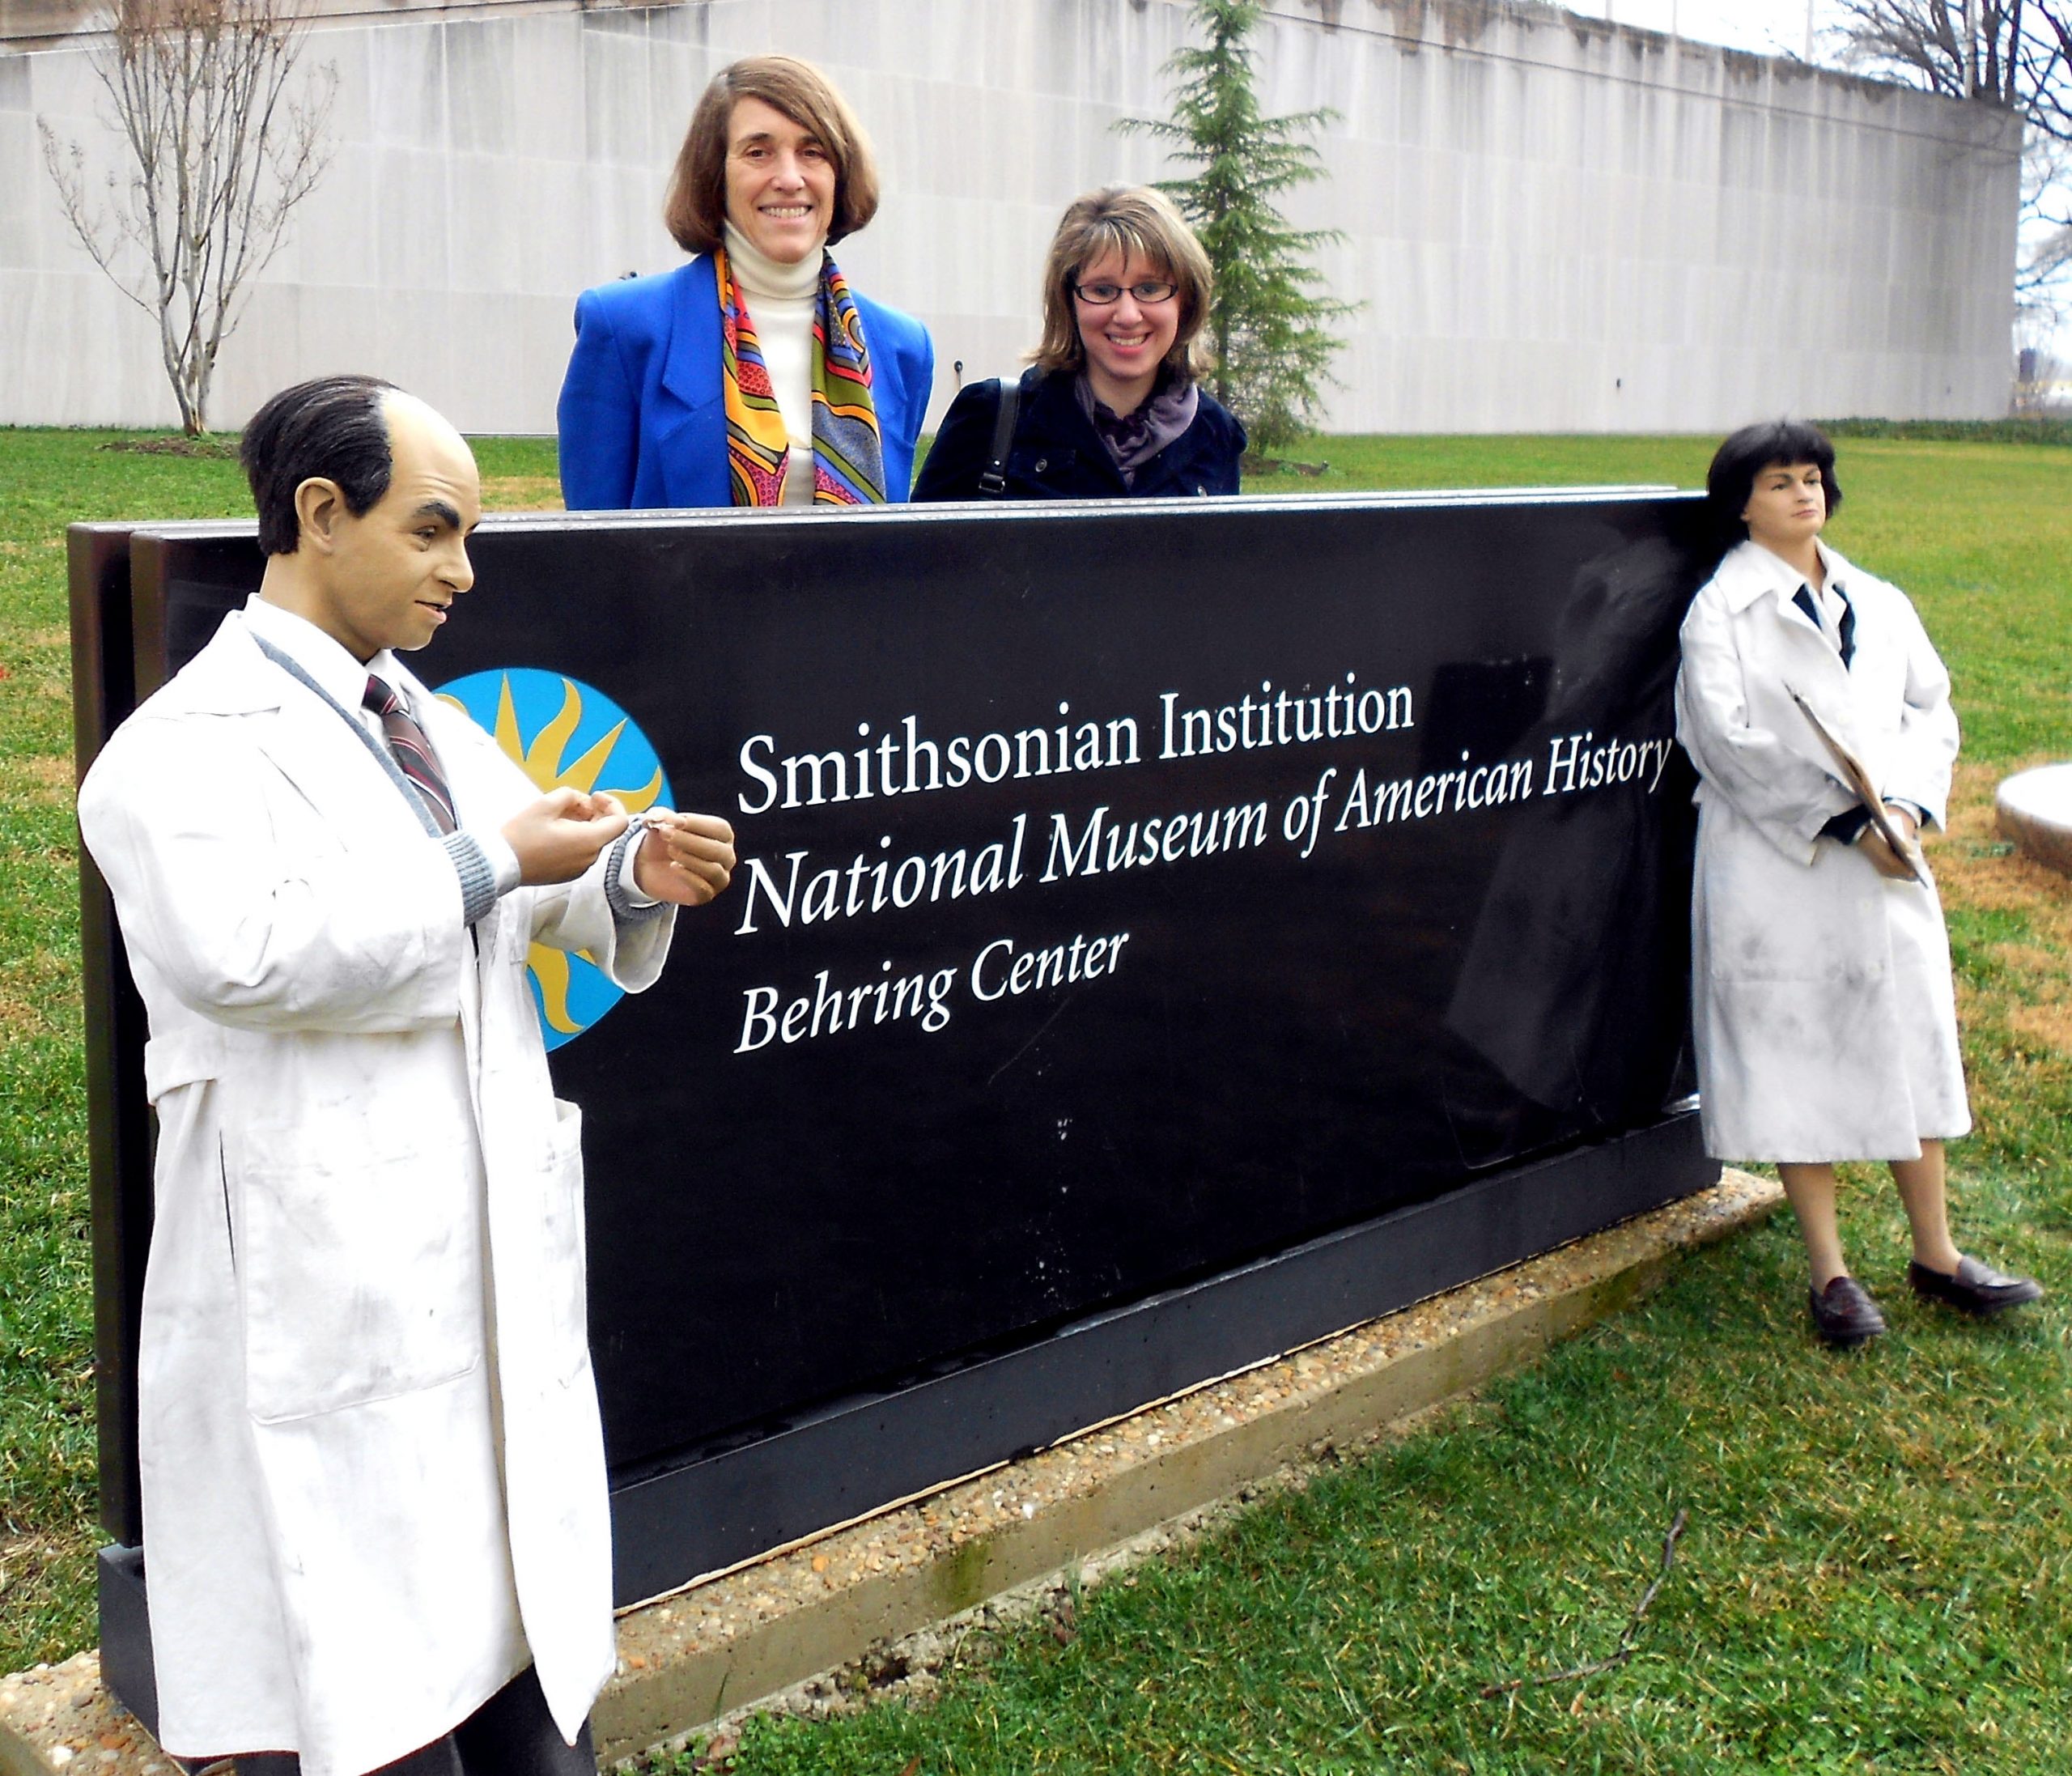 Enrico and Leona saying goodbye to the National Museum of American History, with Cindy Kelly and Alexandra Levy